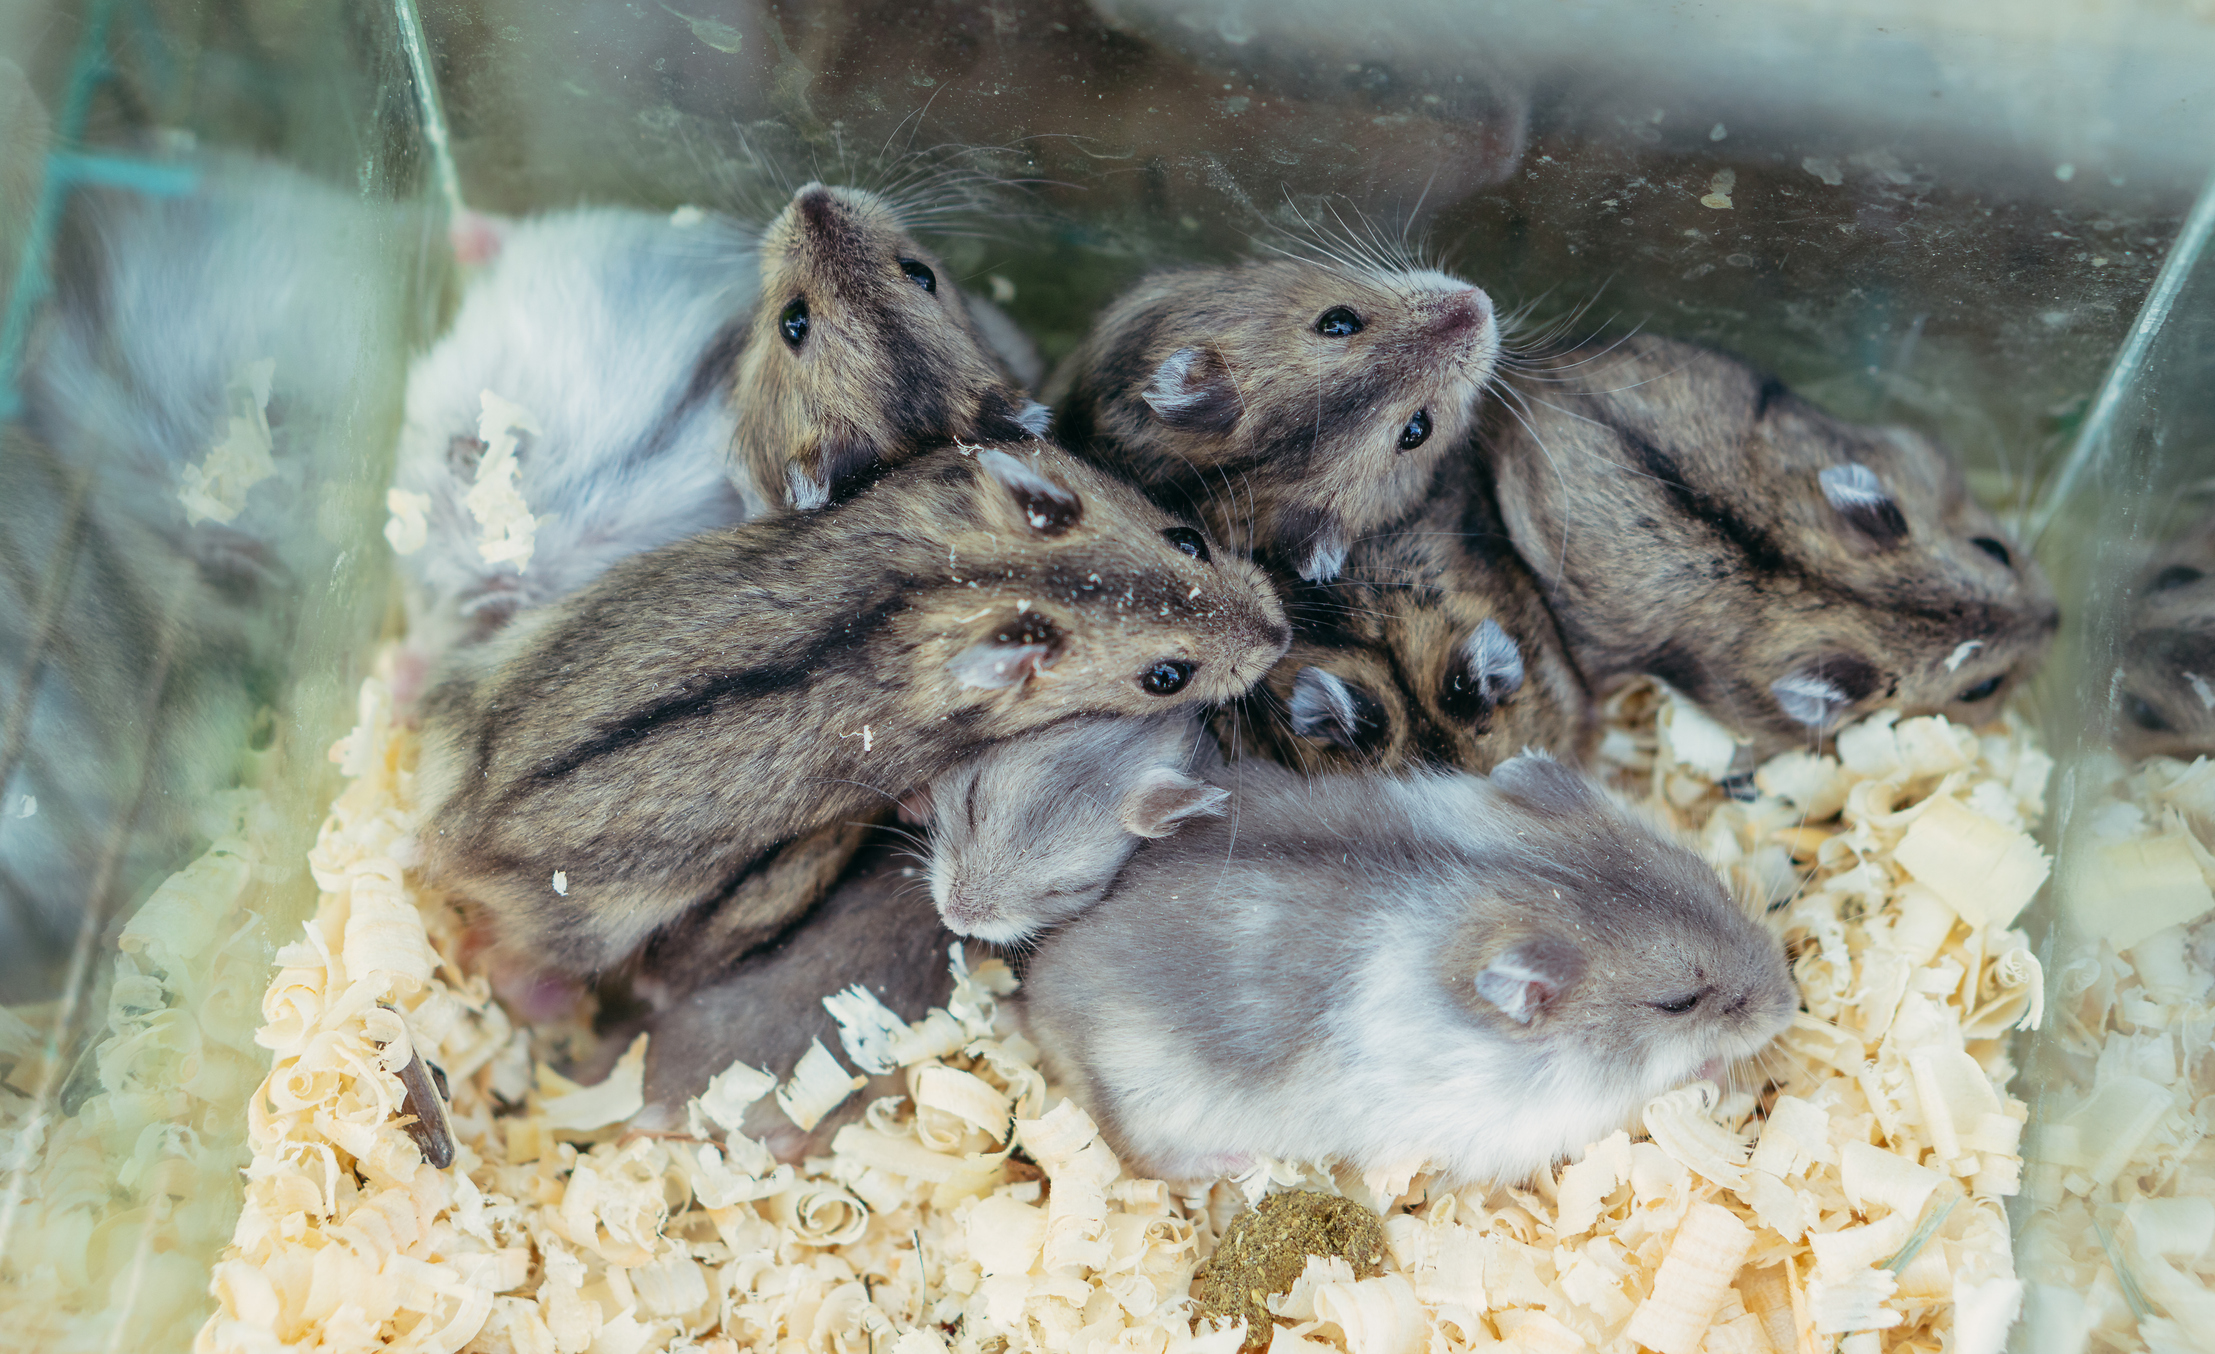 Woman Discovers Box of Live Hamsters Abandoned in Pet Store Dumpster